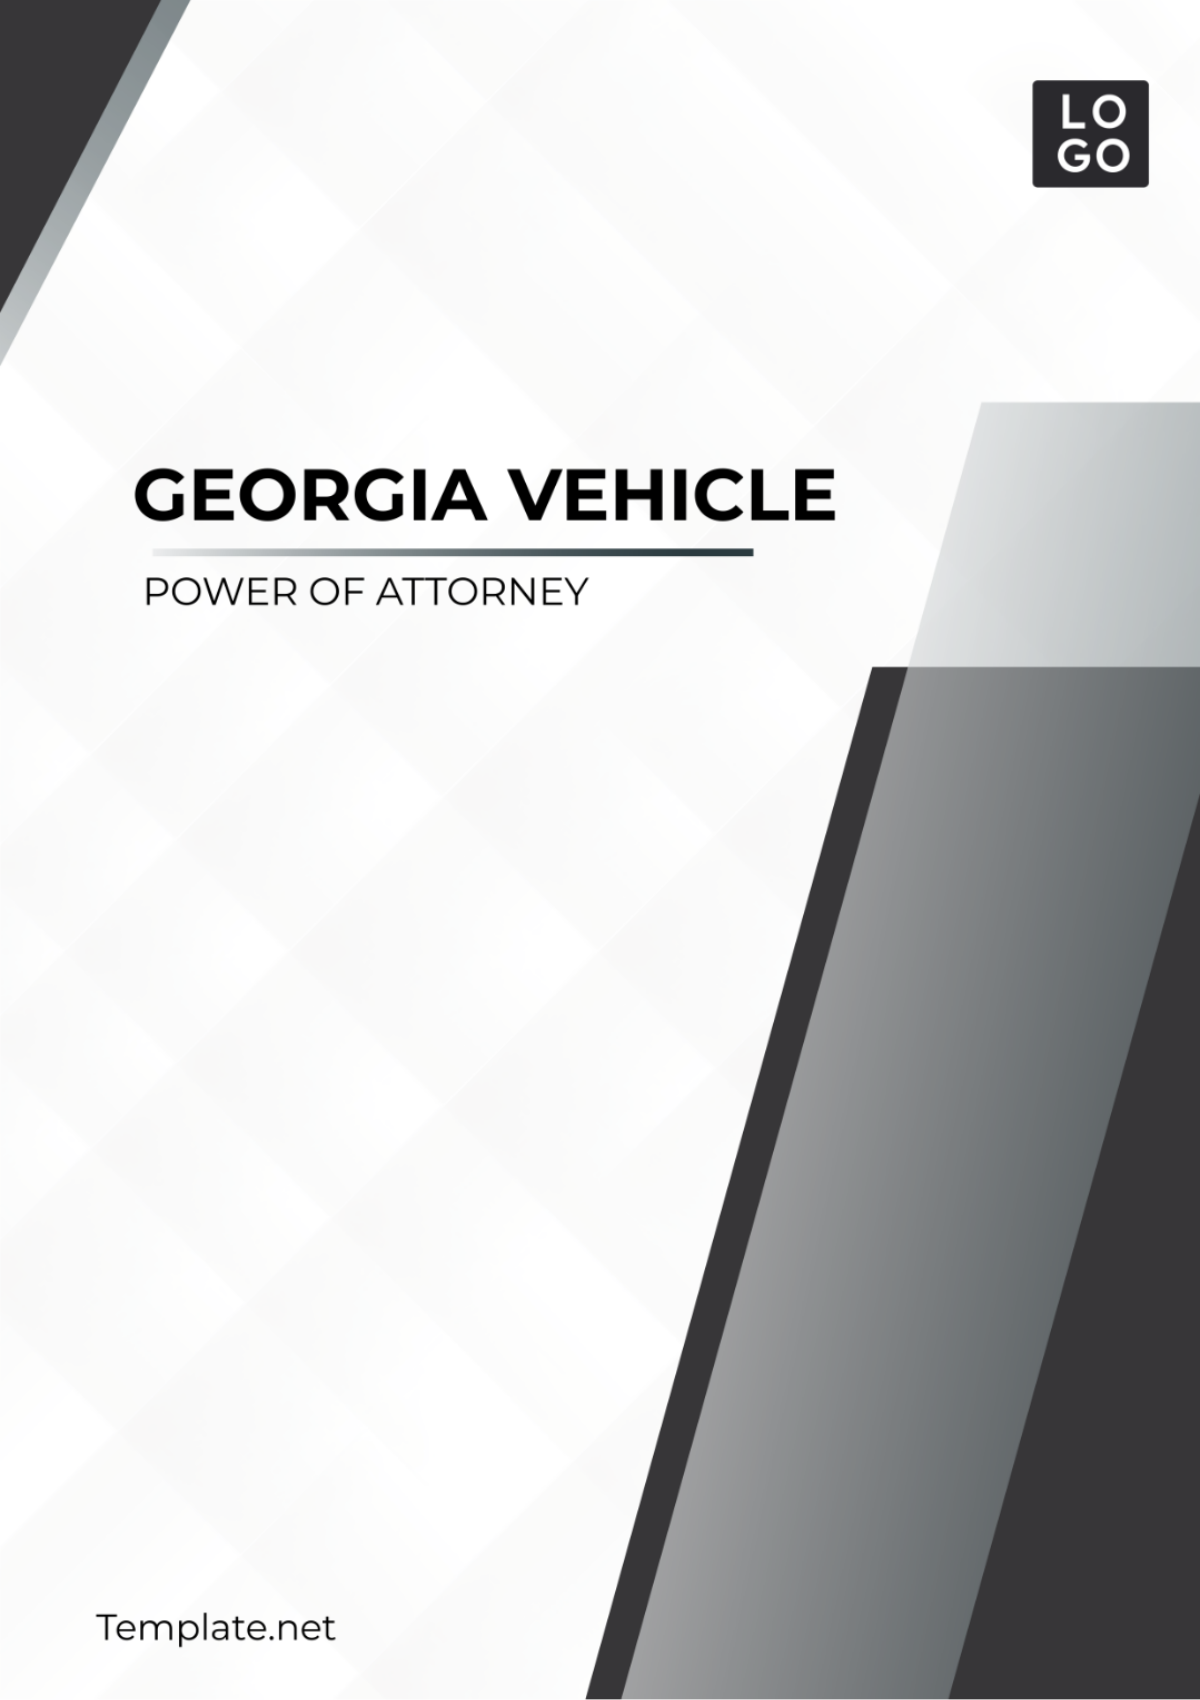 Free Georgia Vehicle Power of Attorney Template